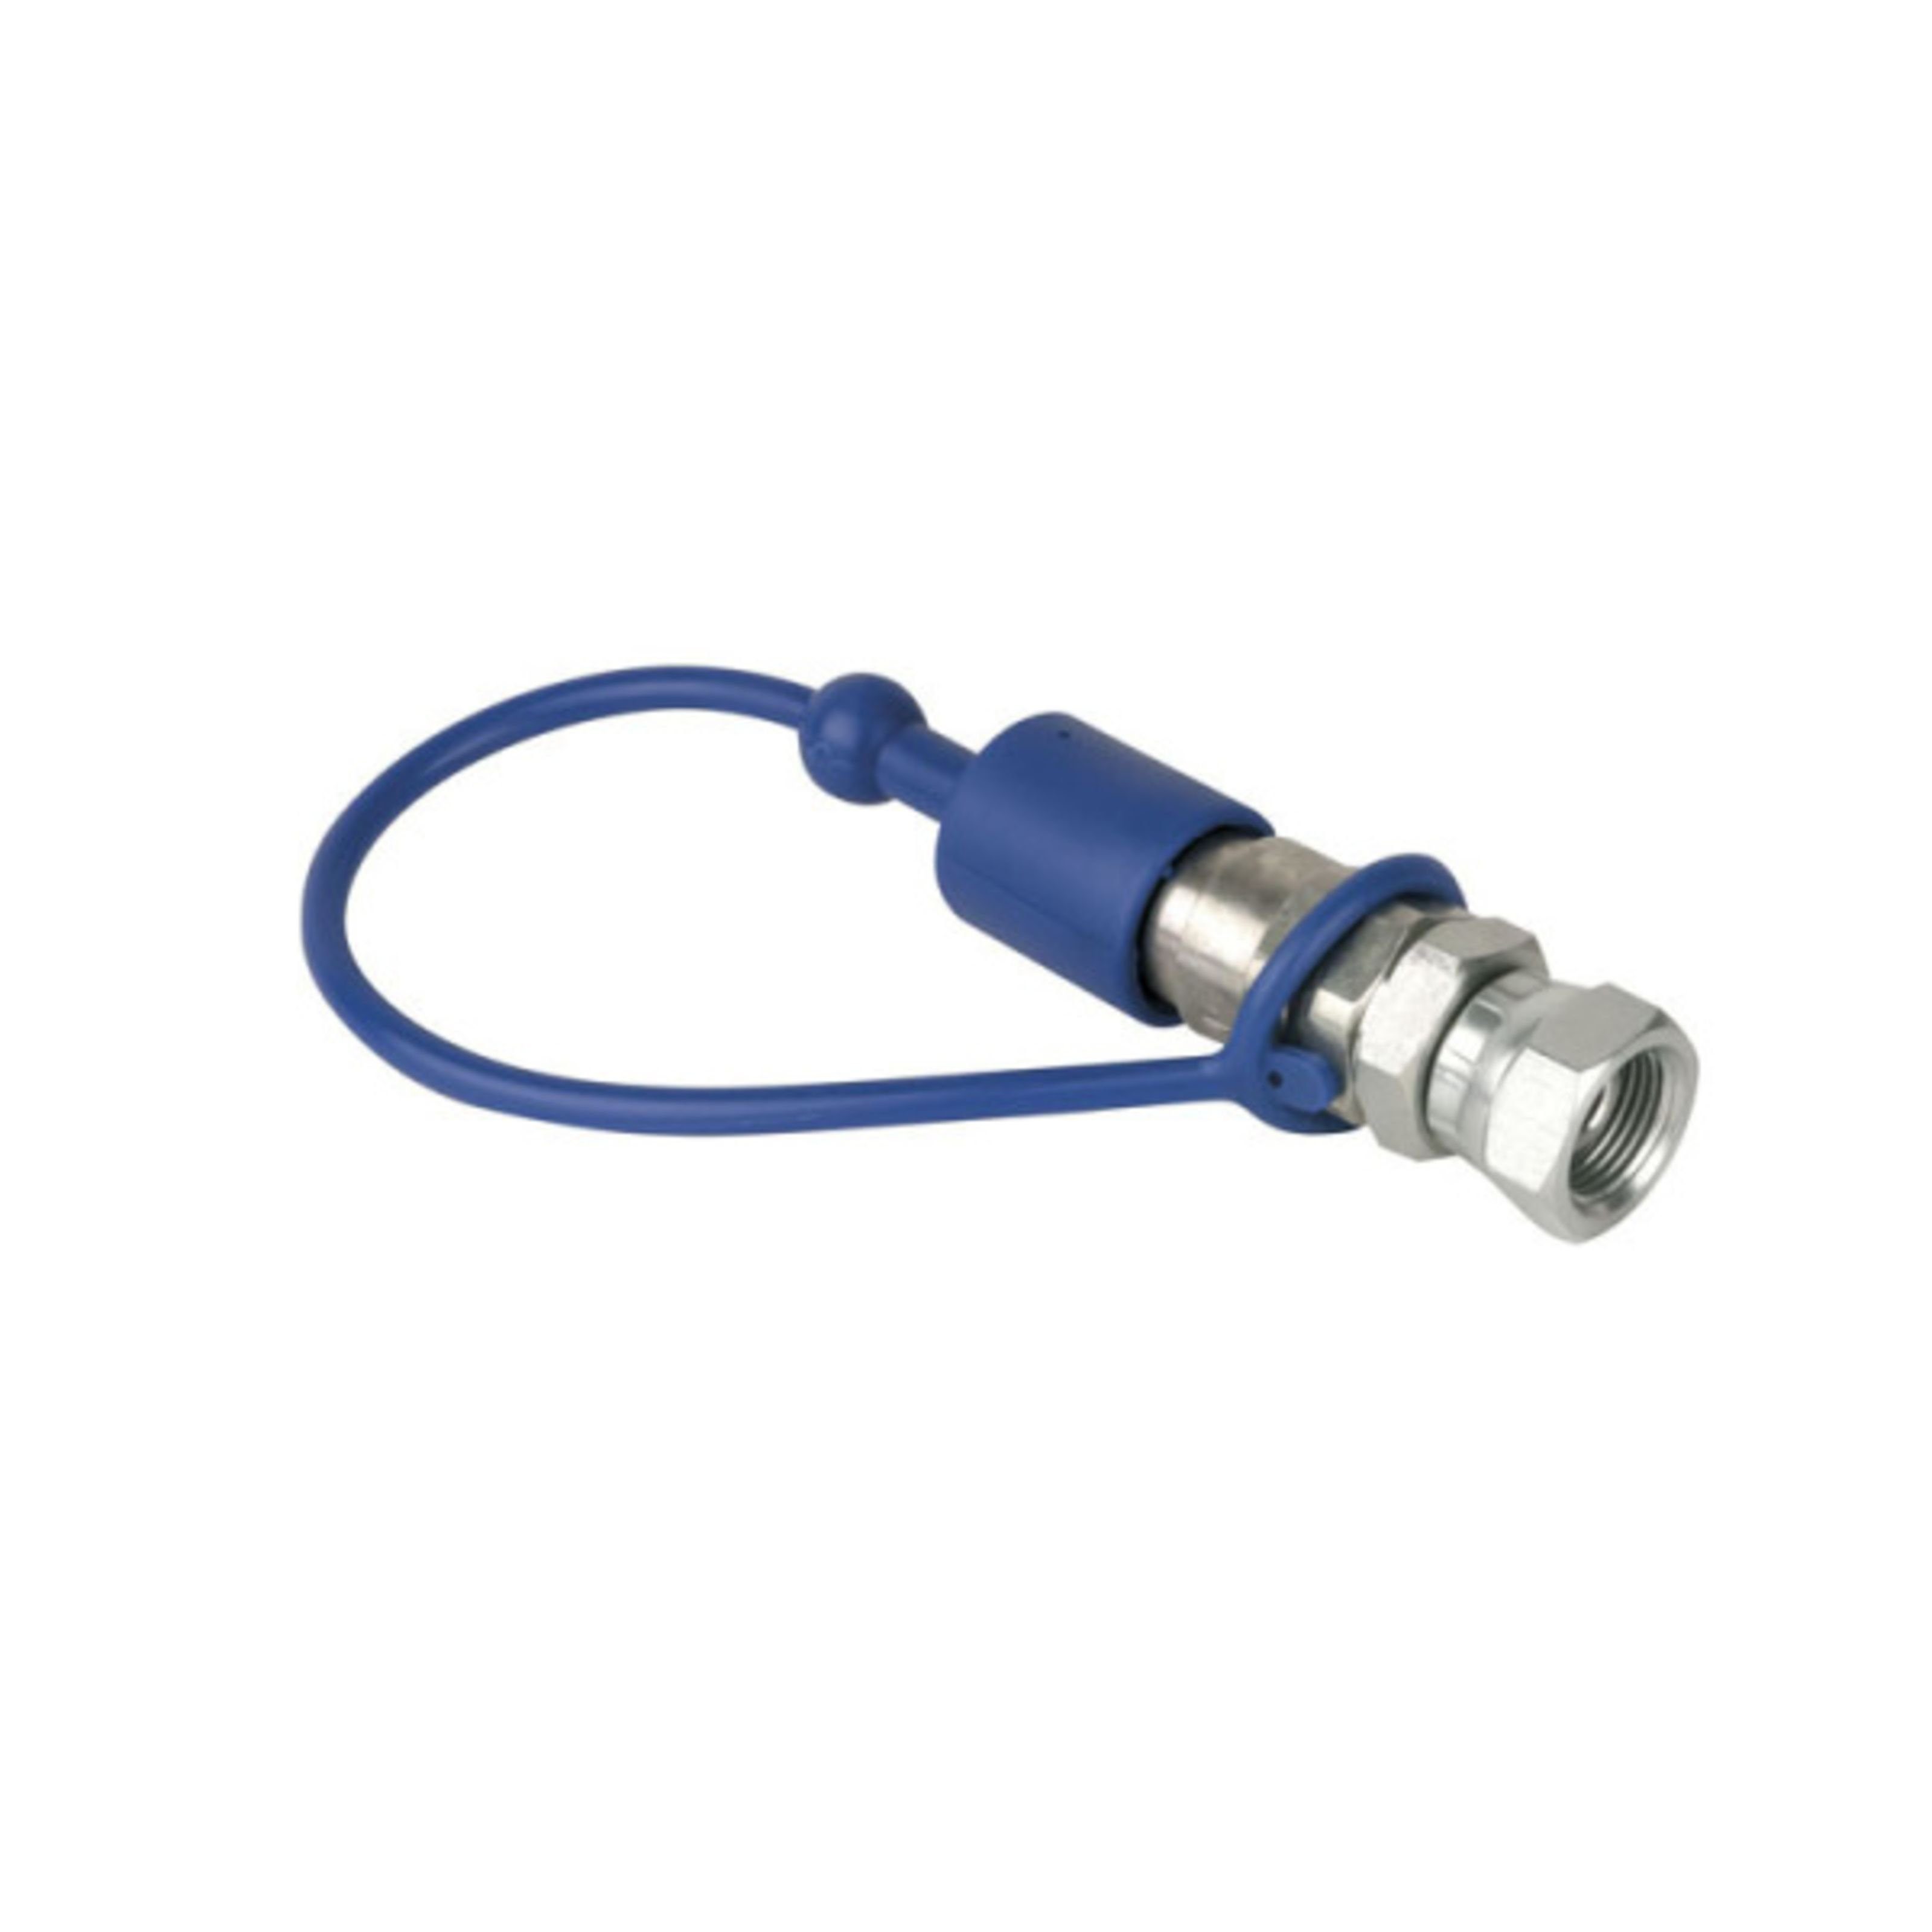 Show adapter Q-Lock to tec 3/8 Discolicht, male CO2